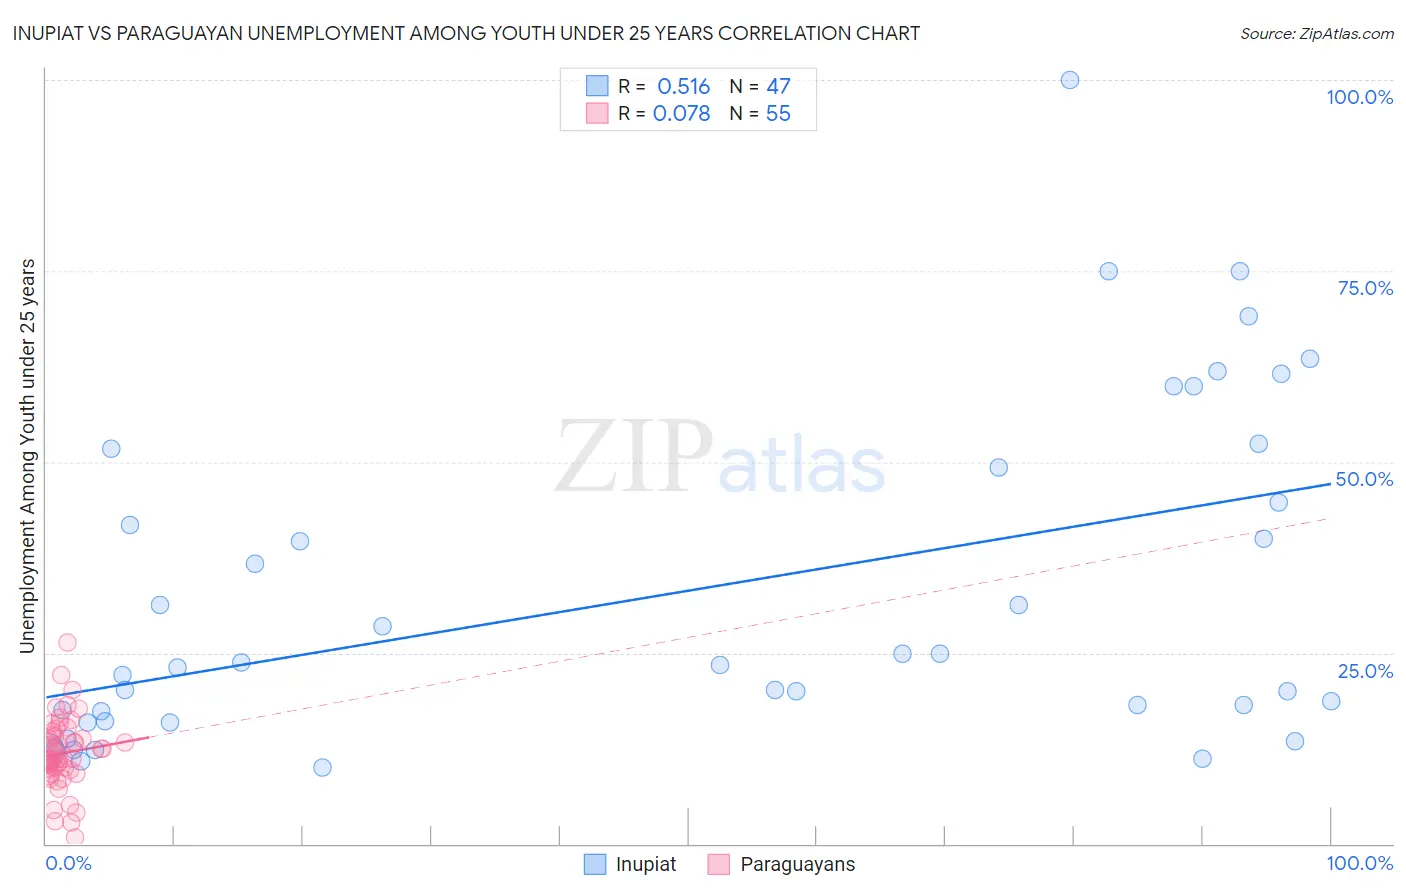 Inupiat vs Paraguayan Unemployment Among Youth under 25 years